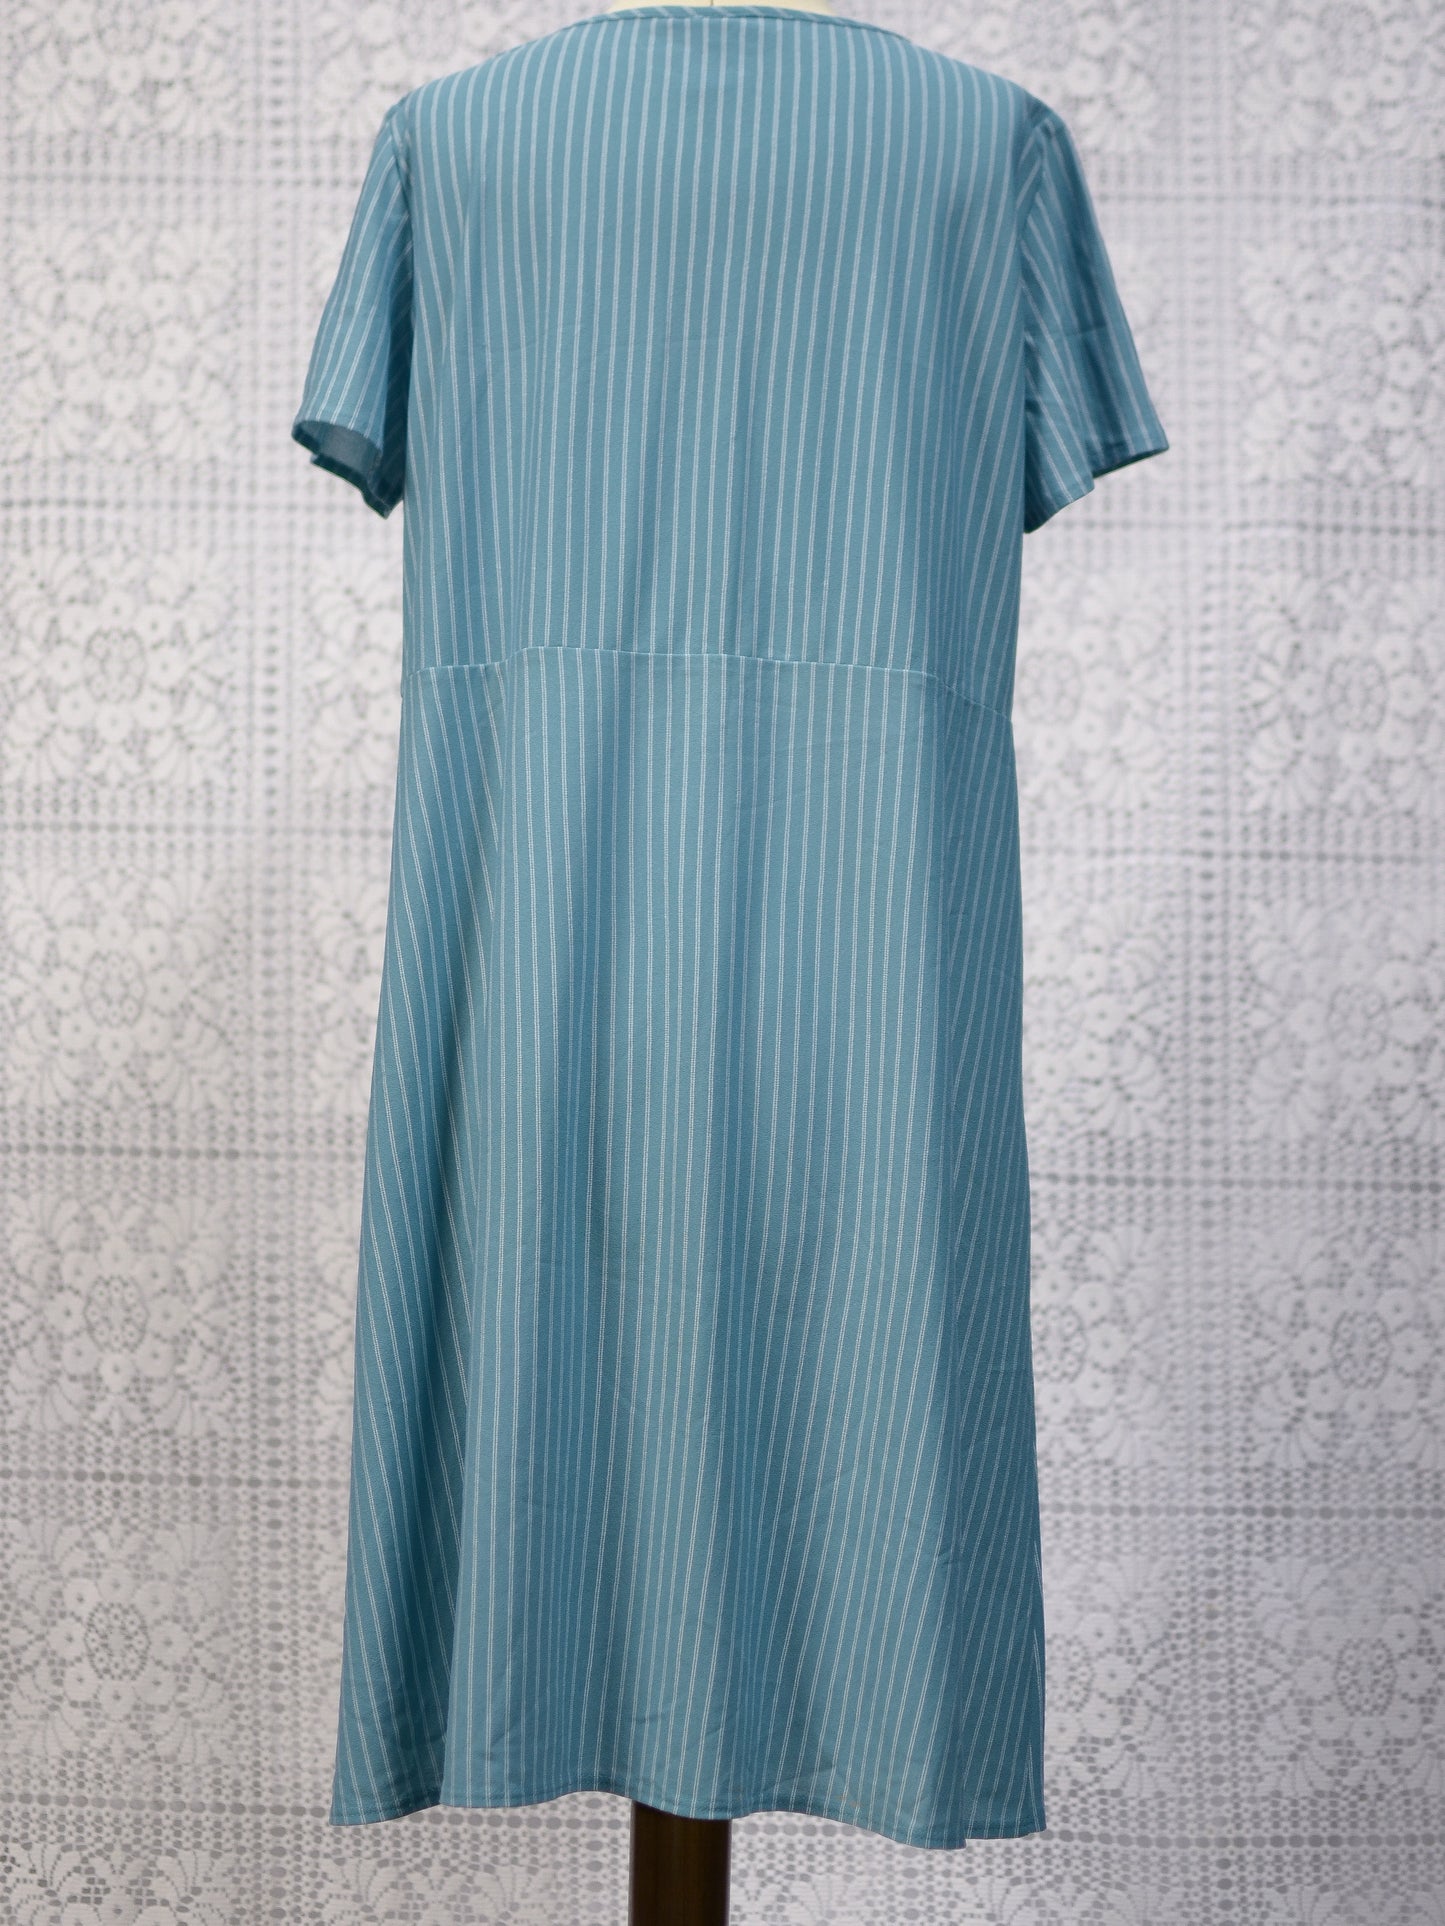 1980s St Michael light turquoise and white pinstripe t-shirt dress